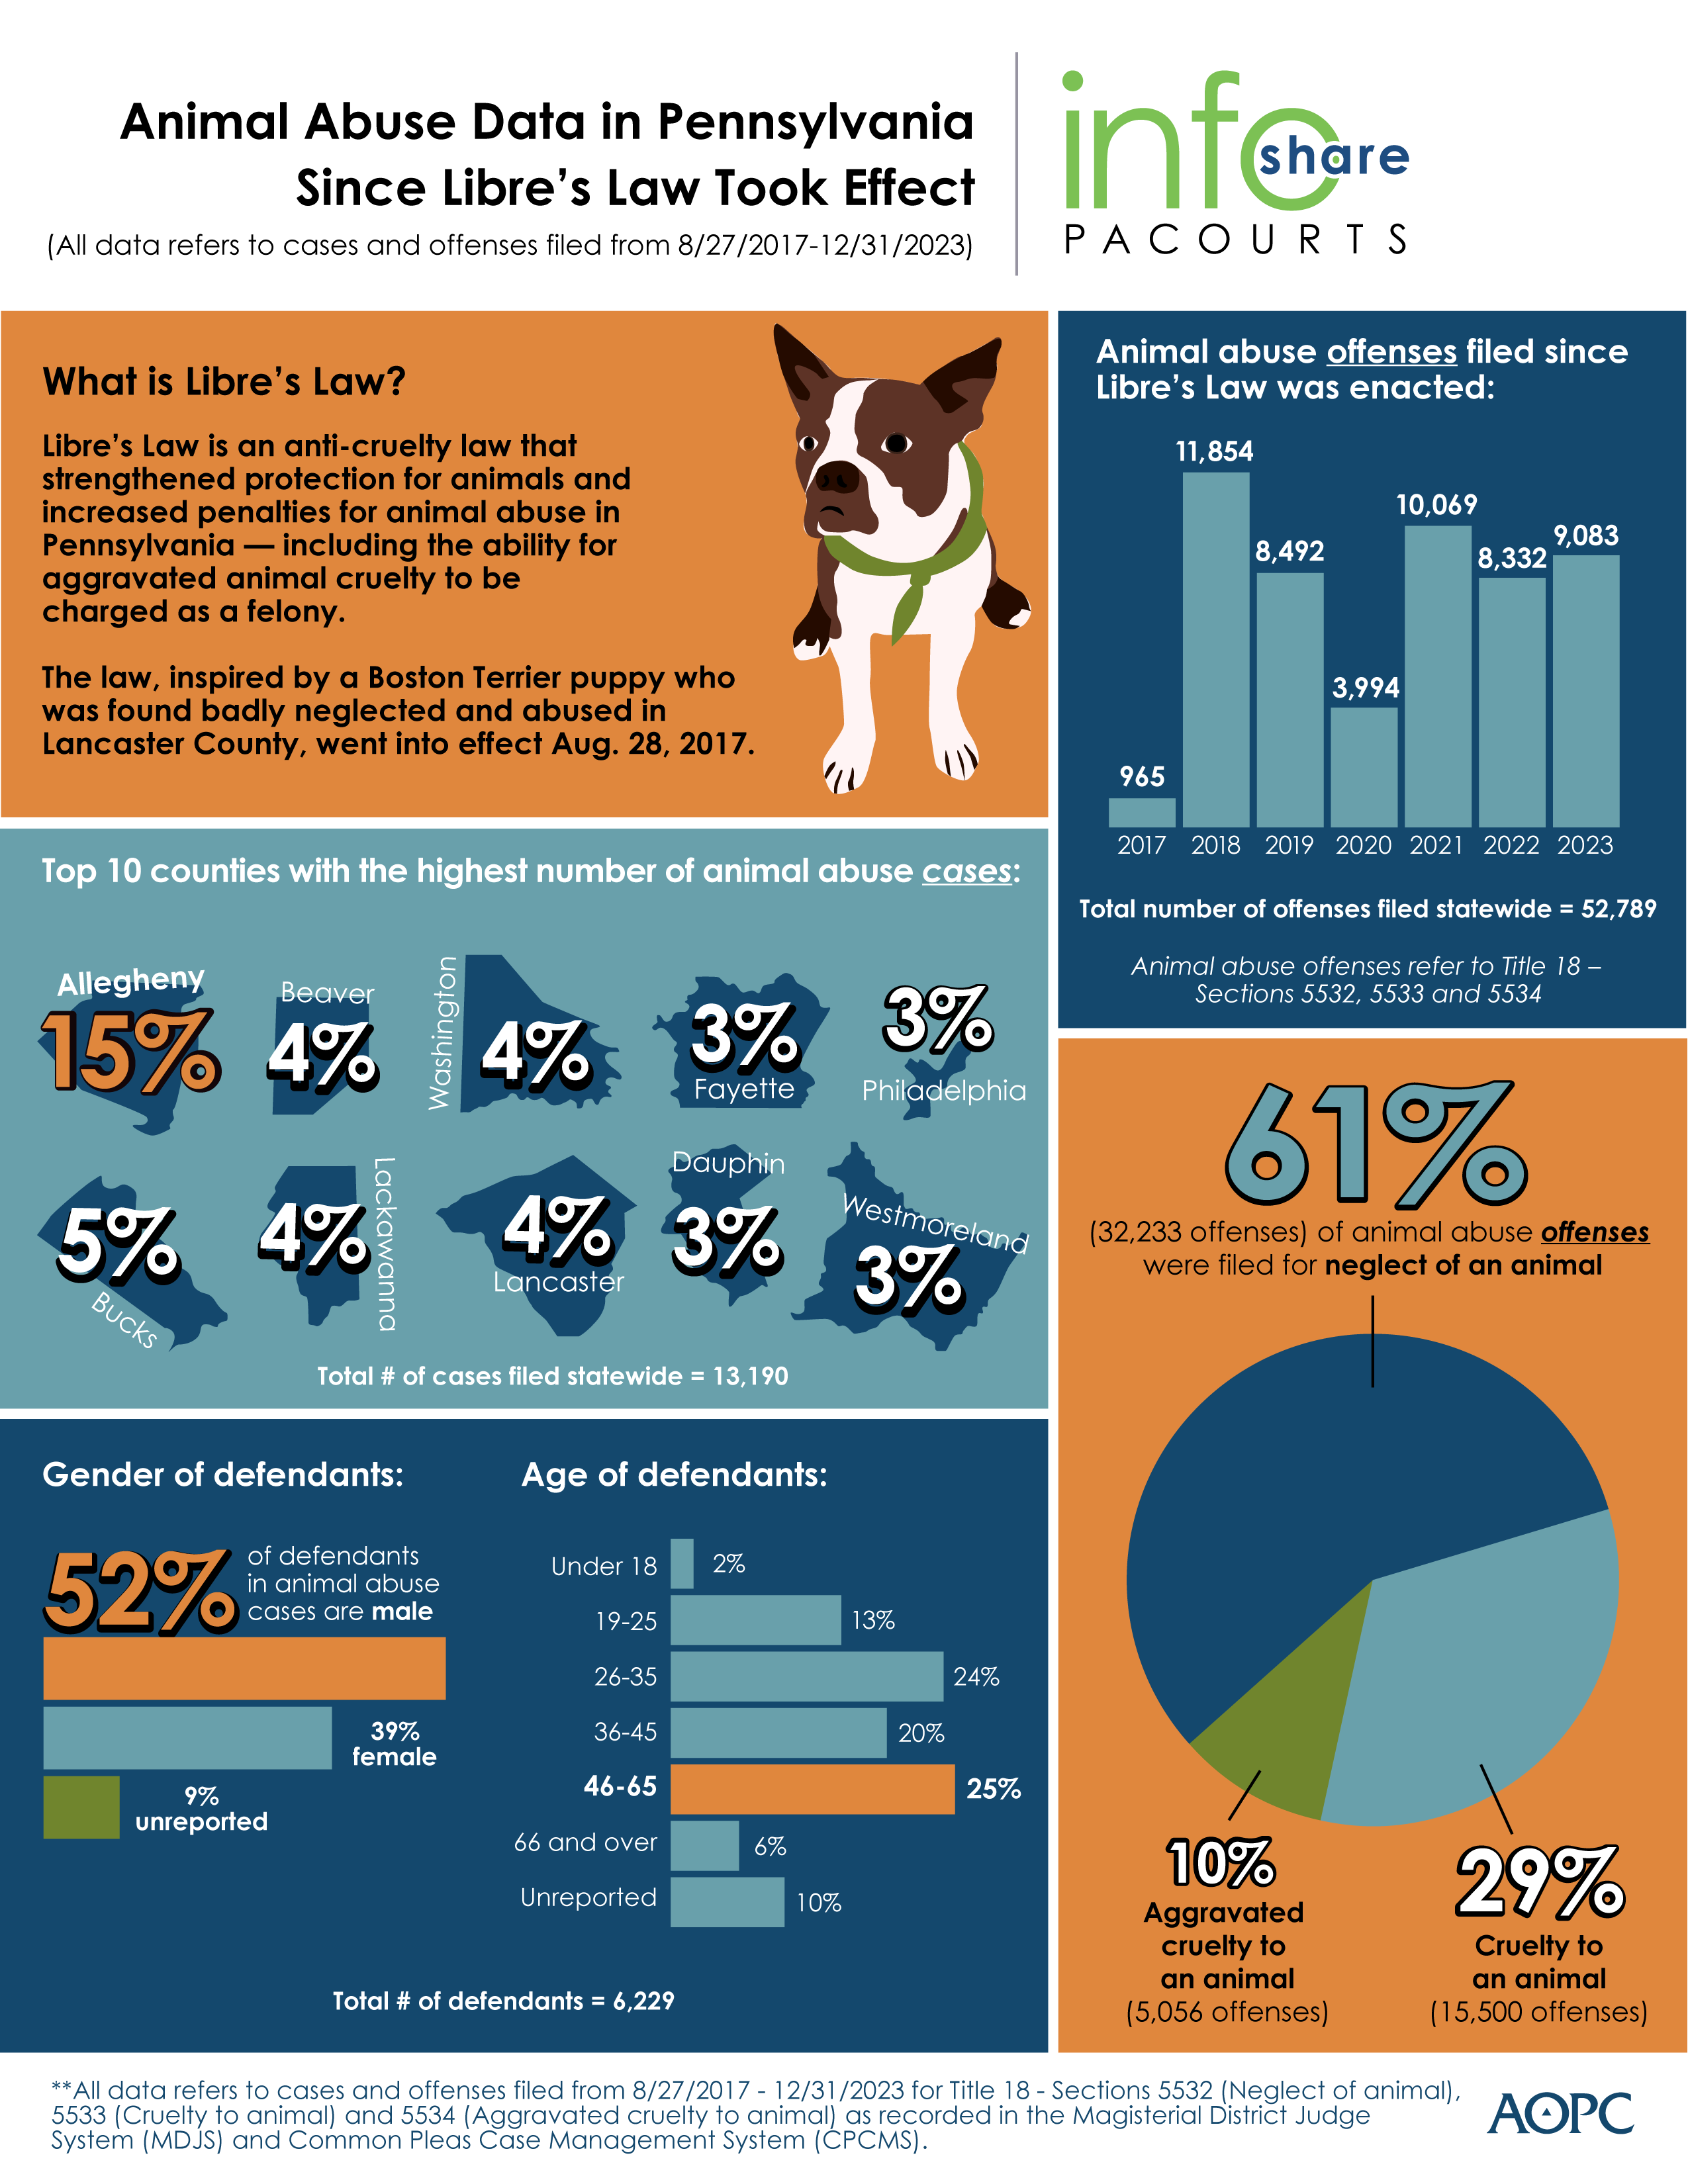 Animal Abuse Data in Pennsylvania Since Libre's Law Took Effect